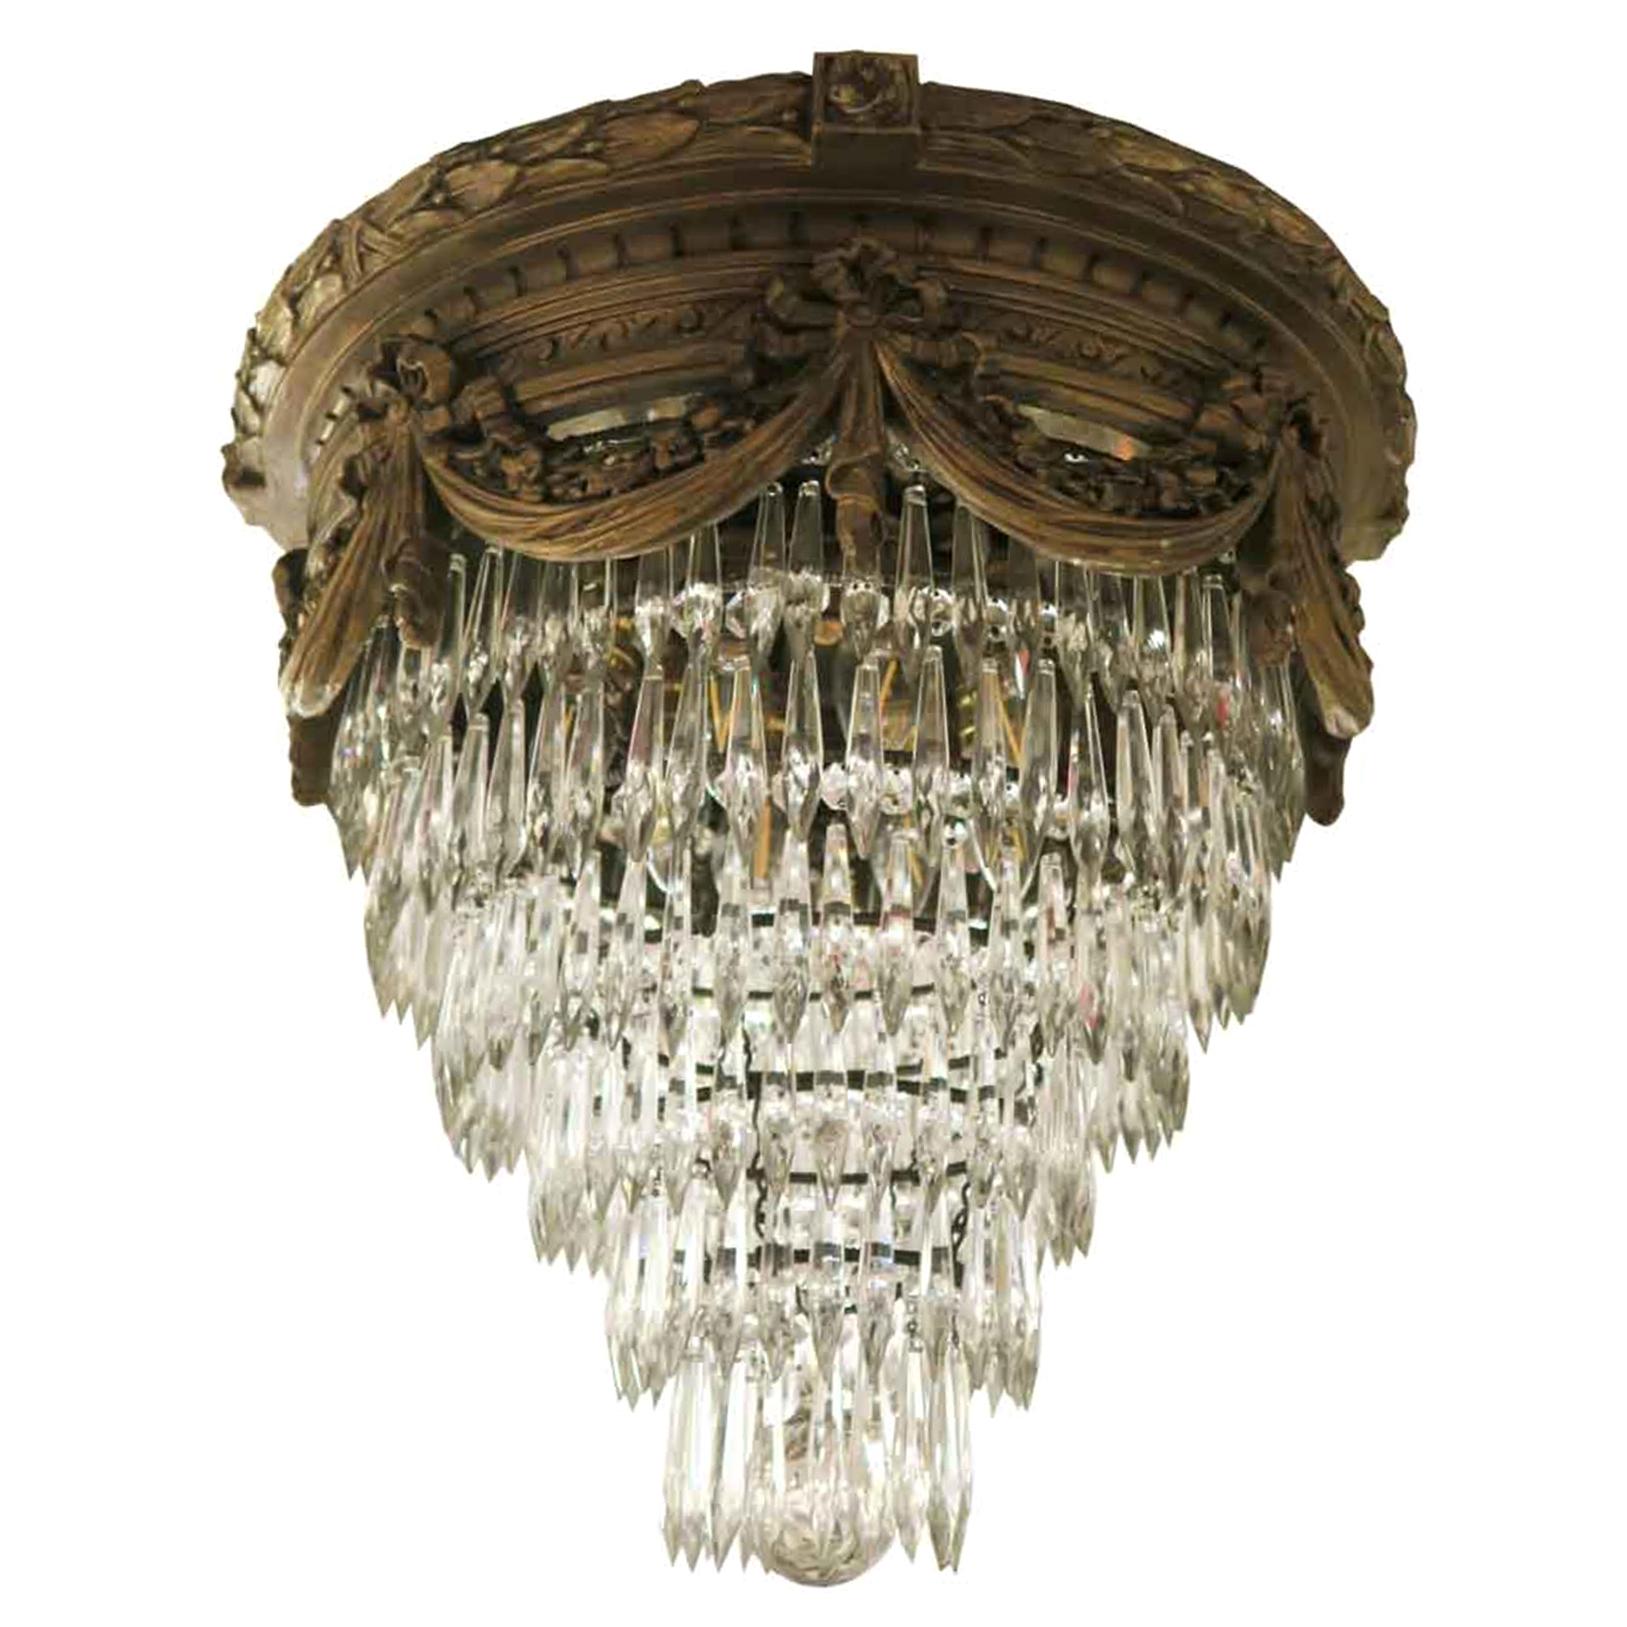 1930s Gold Finish Gesso and Crystal Wedding Cake Flush Mount Light